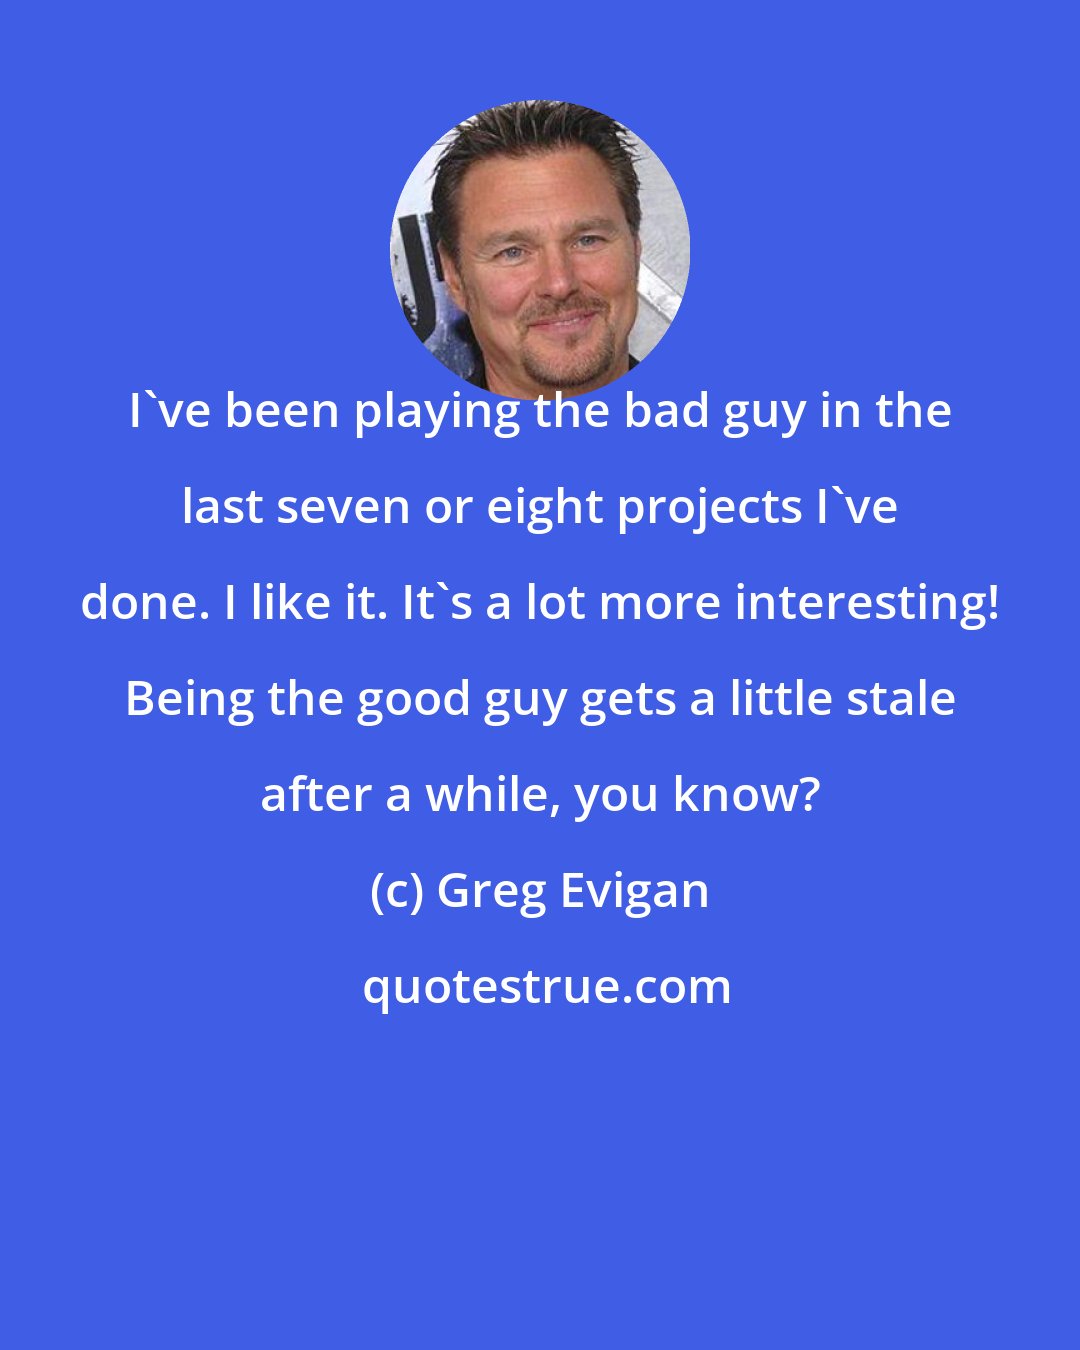 Greg Evigan: I've been playing the bad guy in the last seven or eight projects I've done. I like it. It's a lot more interesting! Being the good guy gets a little stale after a while, you know?